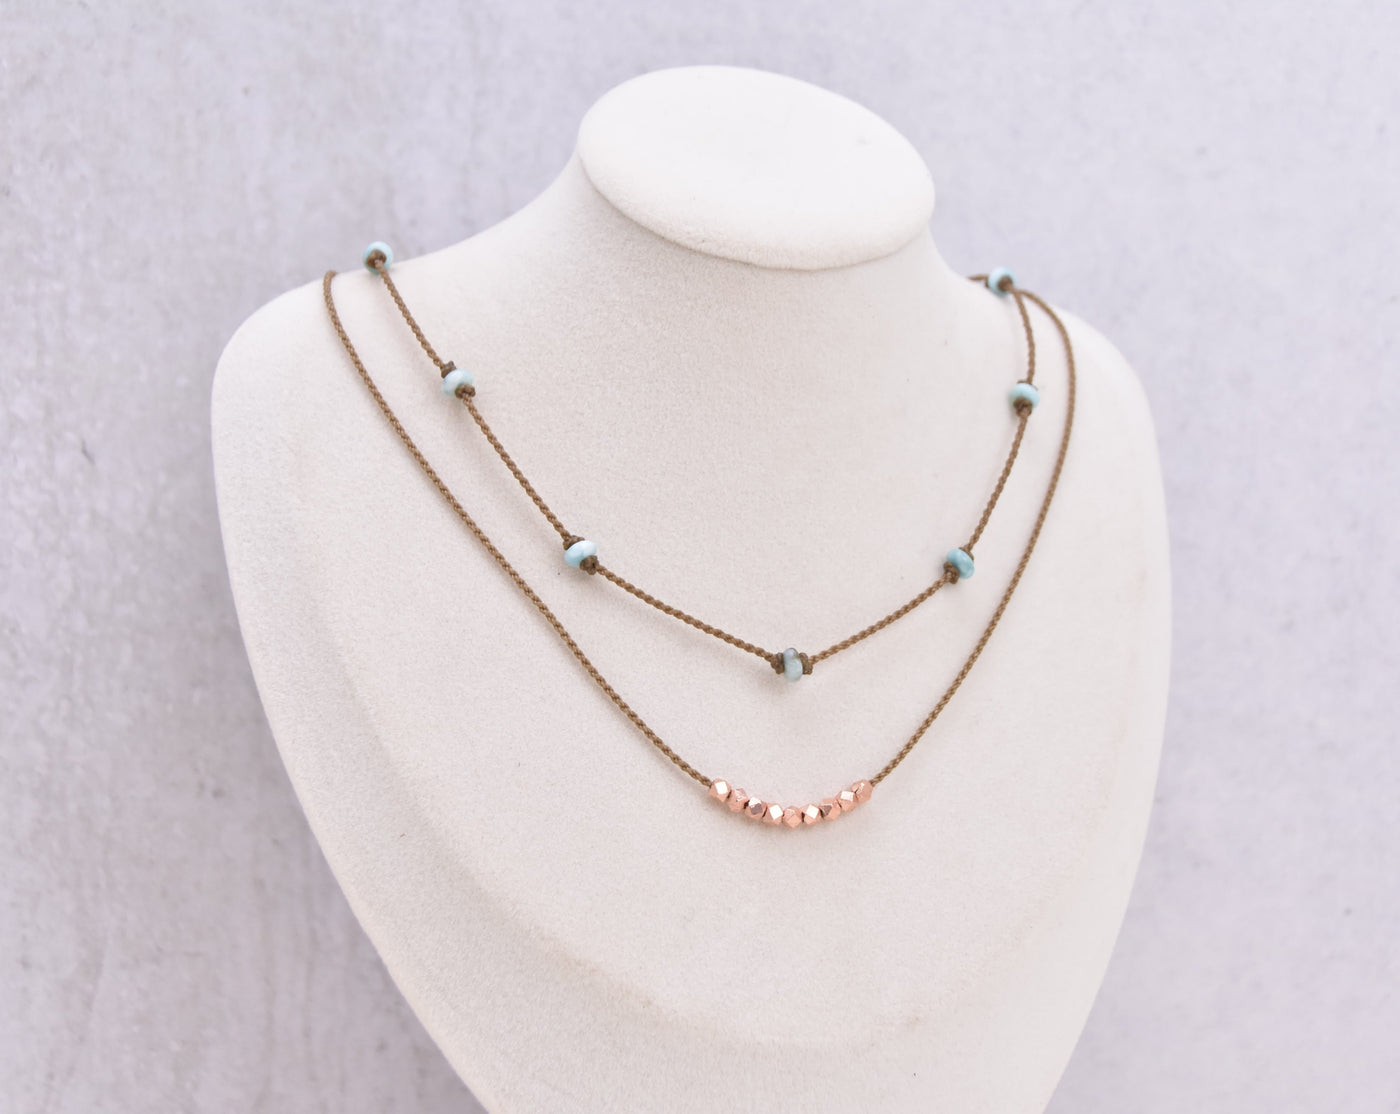 Clear Skies - Necklace Stack (10% off)